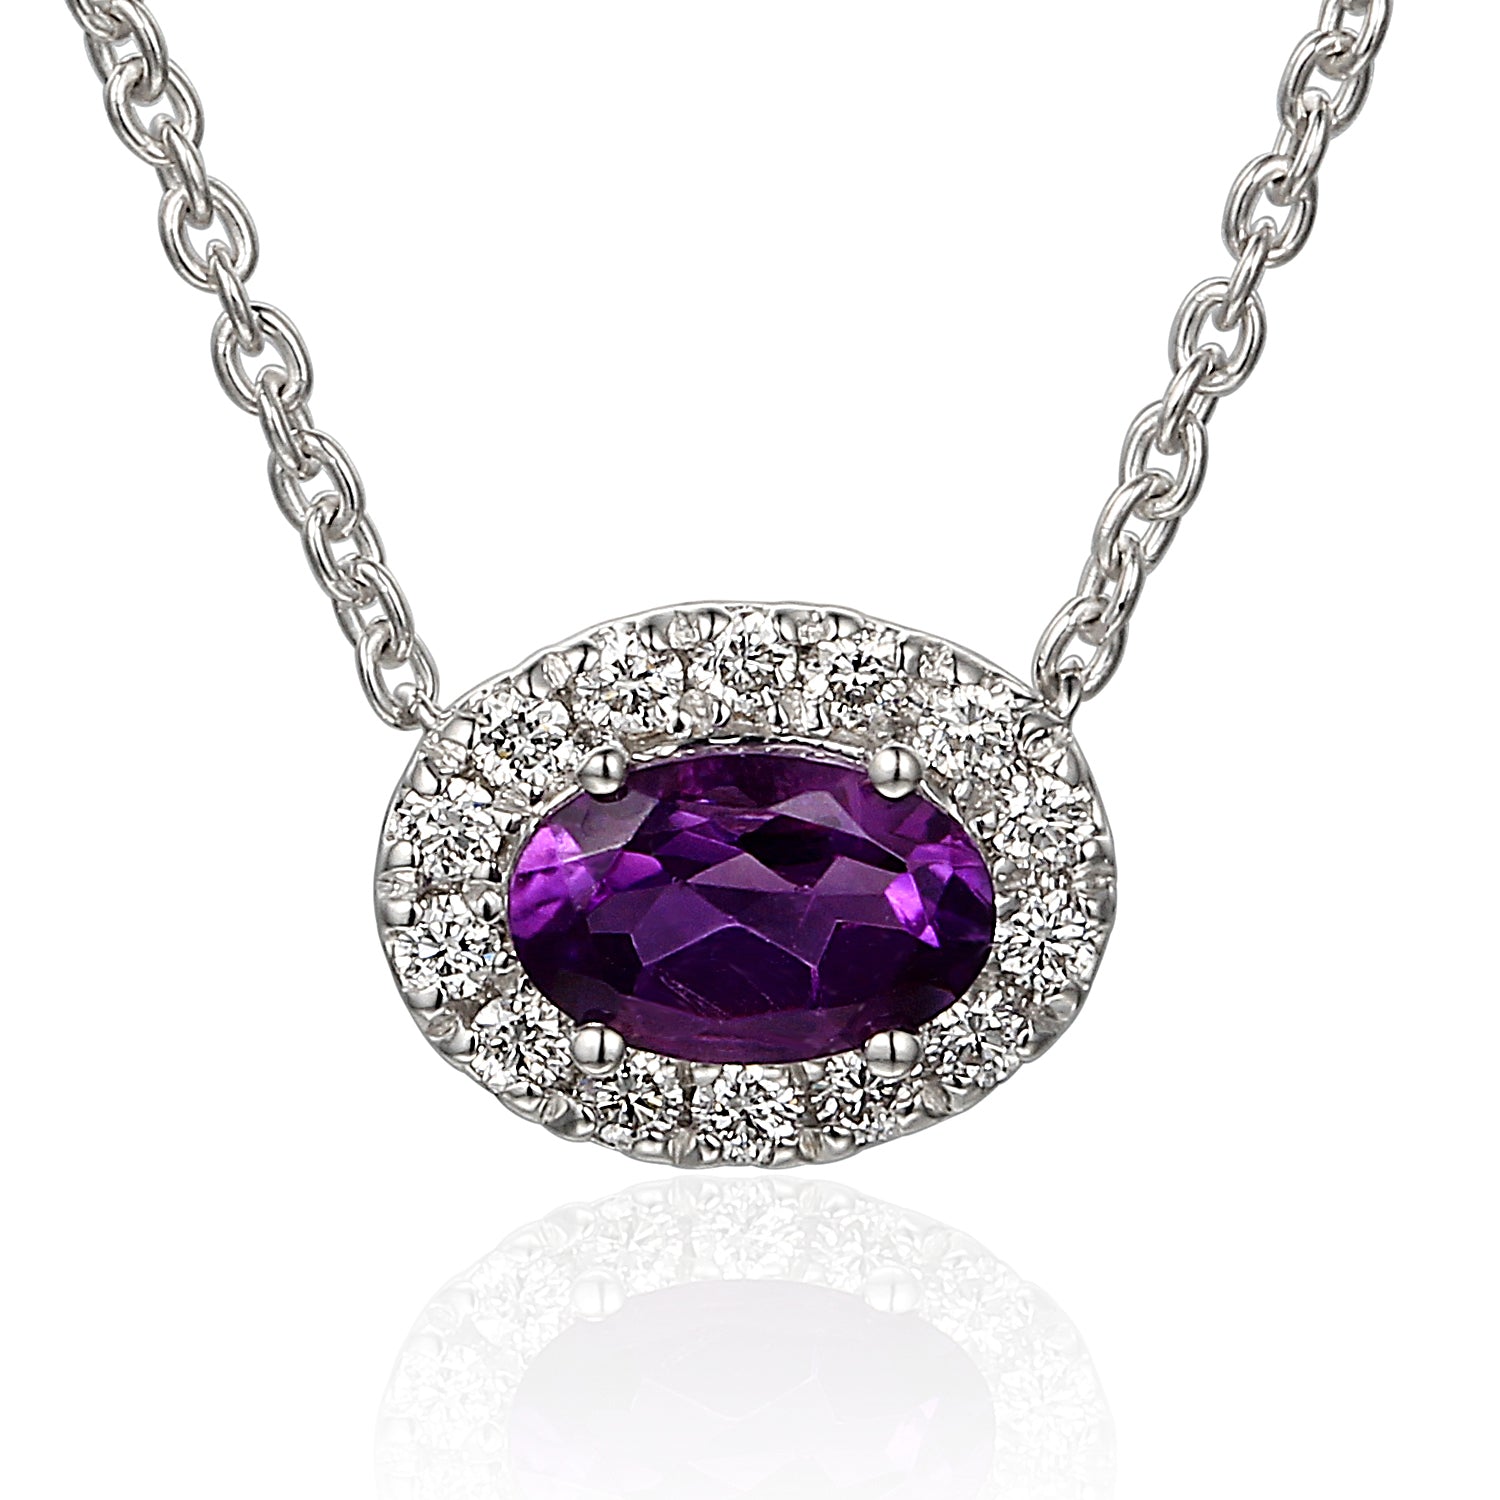 18ct White Gold Oval Amethyst and Diamond Pendant on Chain